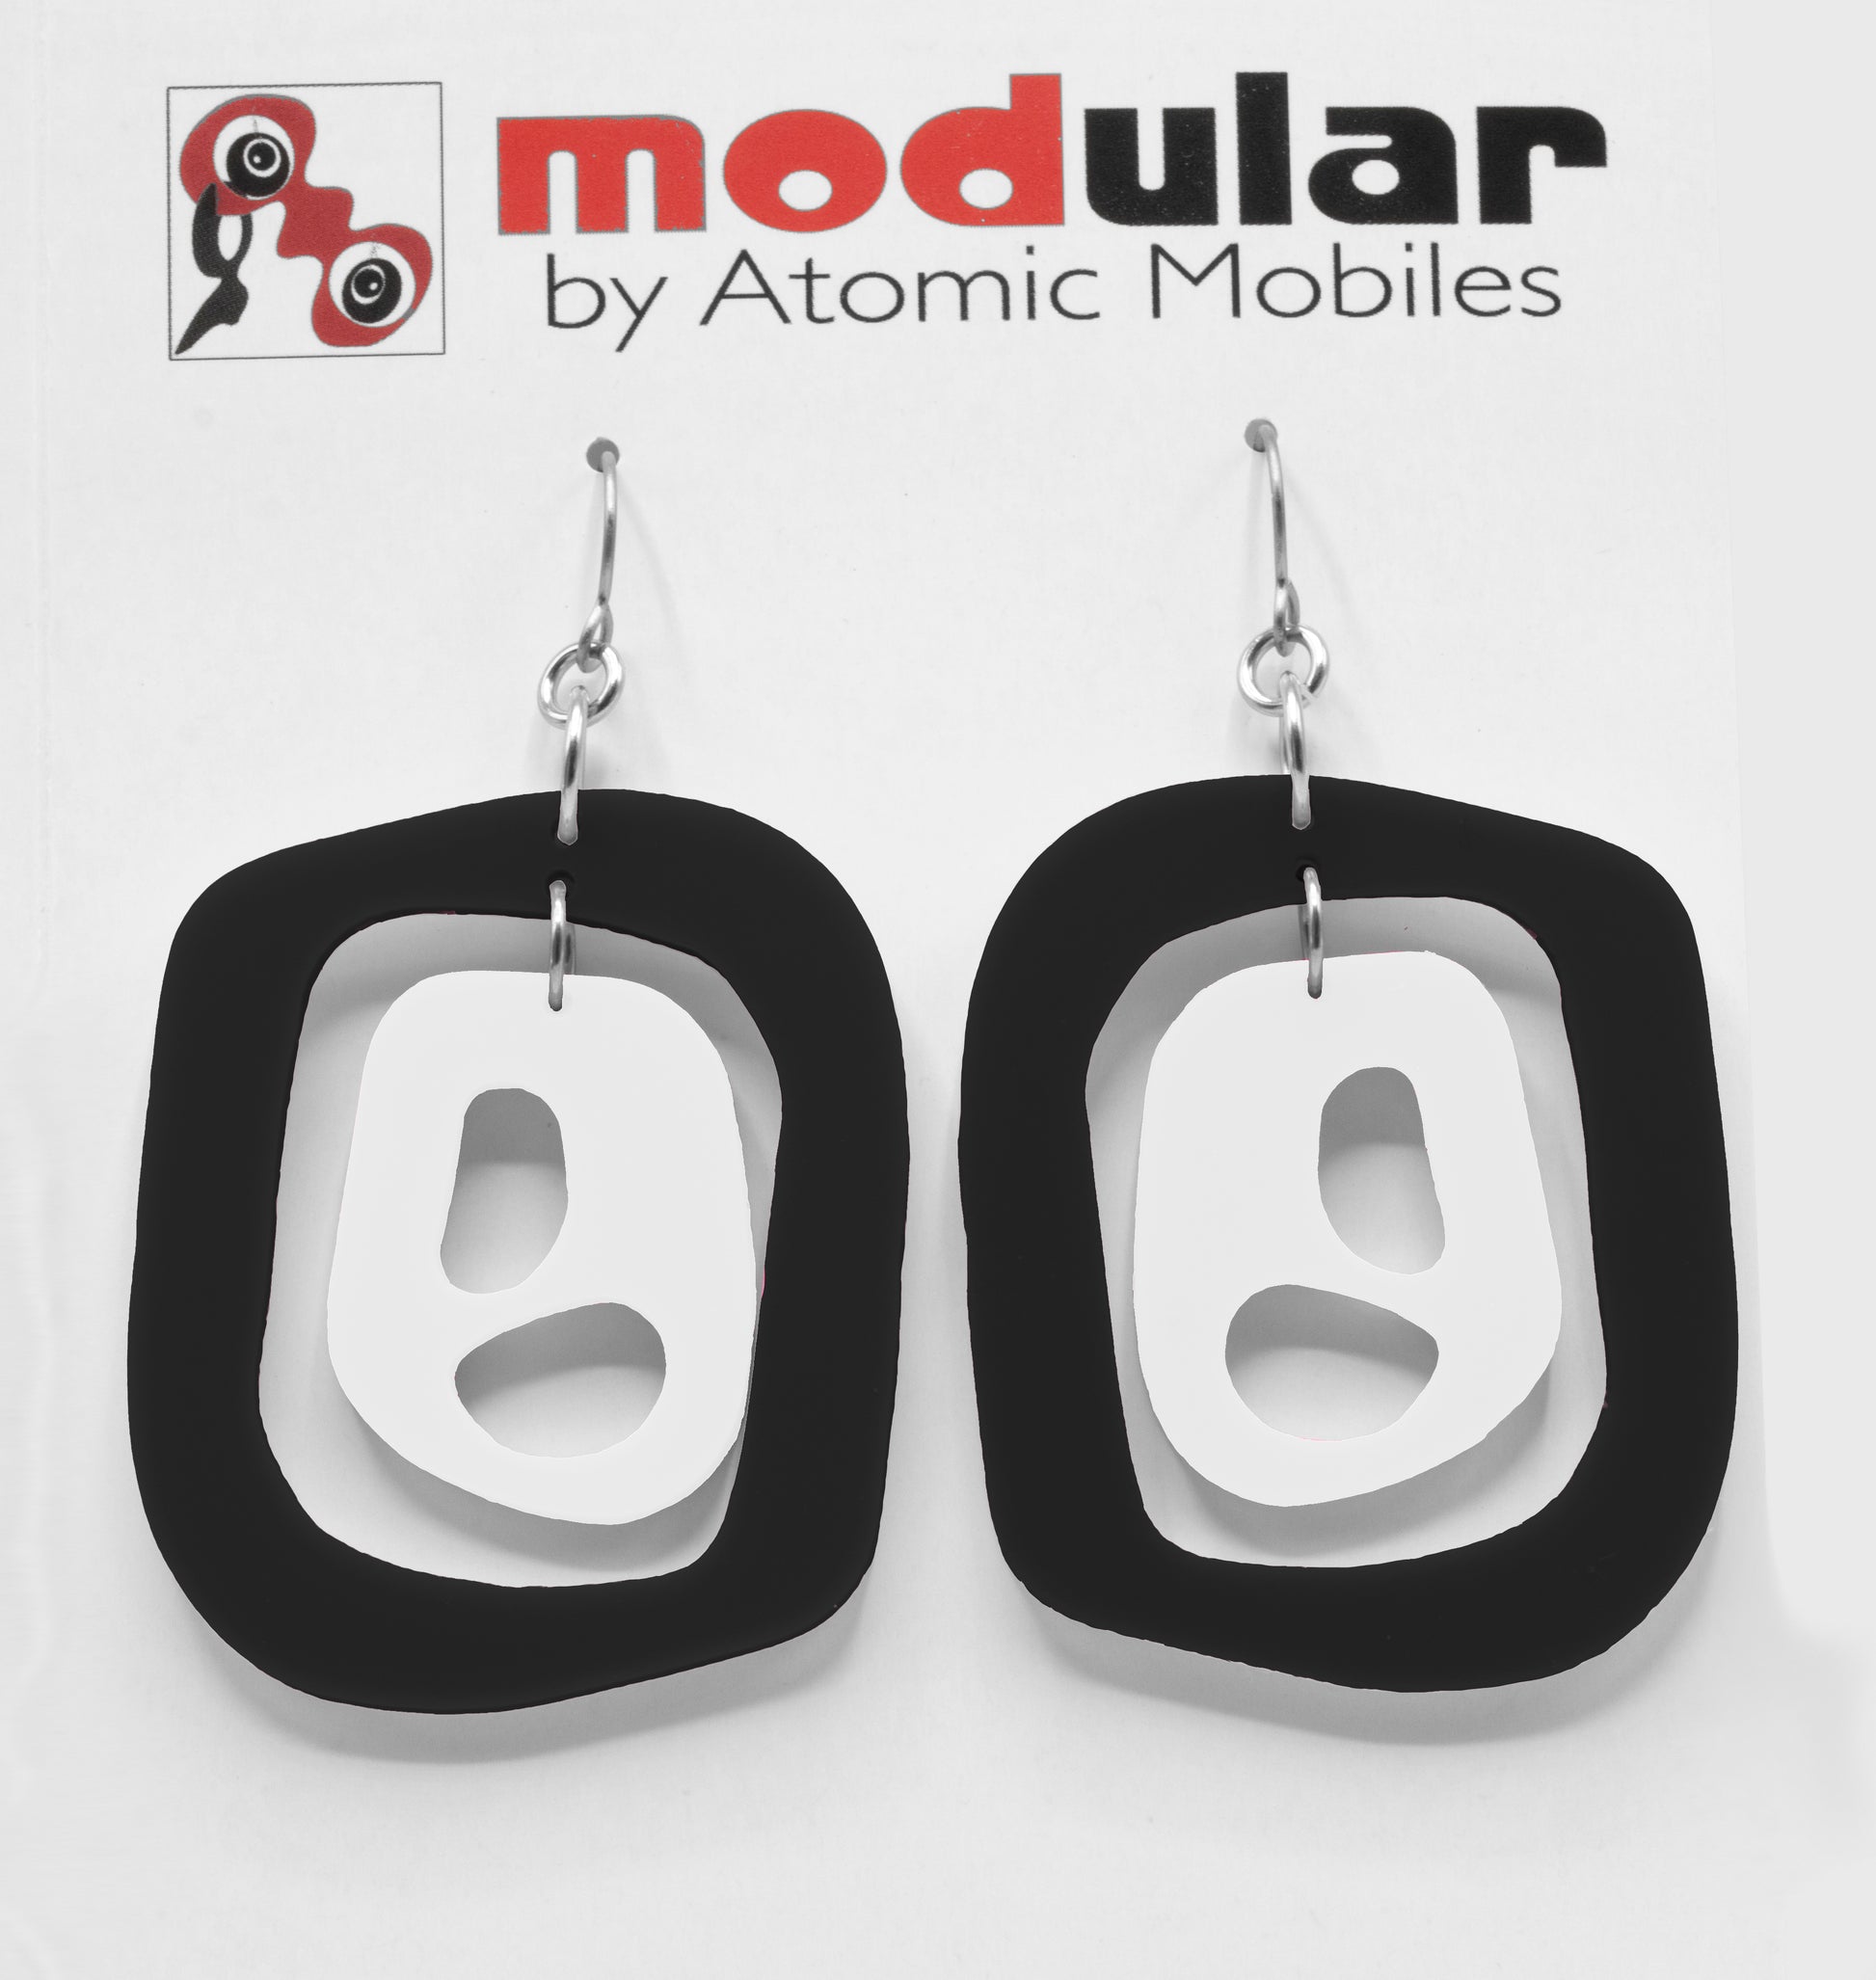 MODular Earrings - Mid 20th Statement Earrings in Black and White by AtomicMobiles.com - retro era mod handmade jewelry